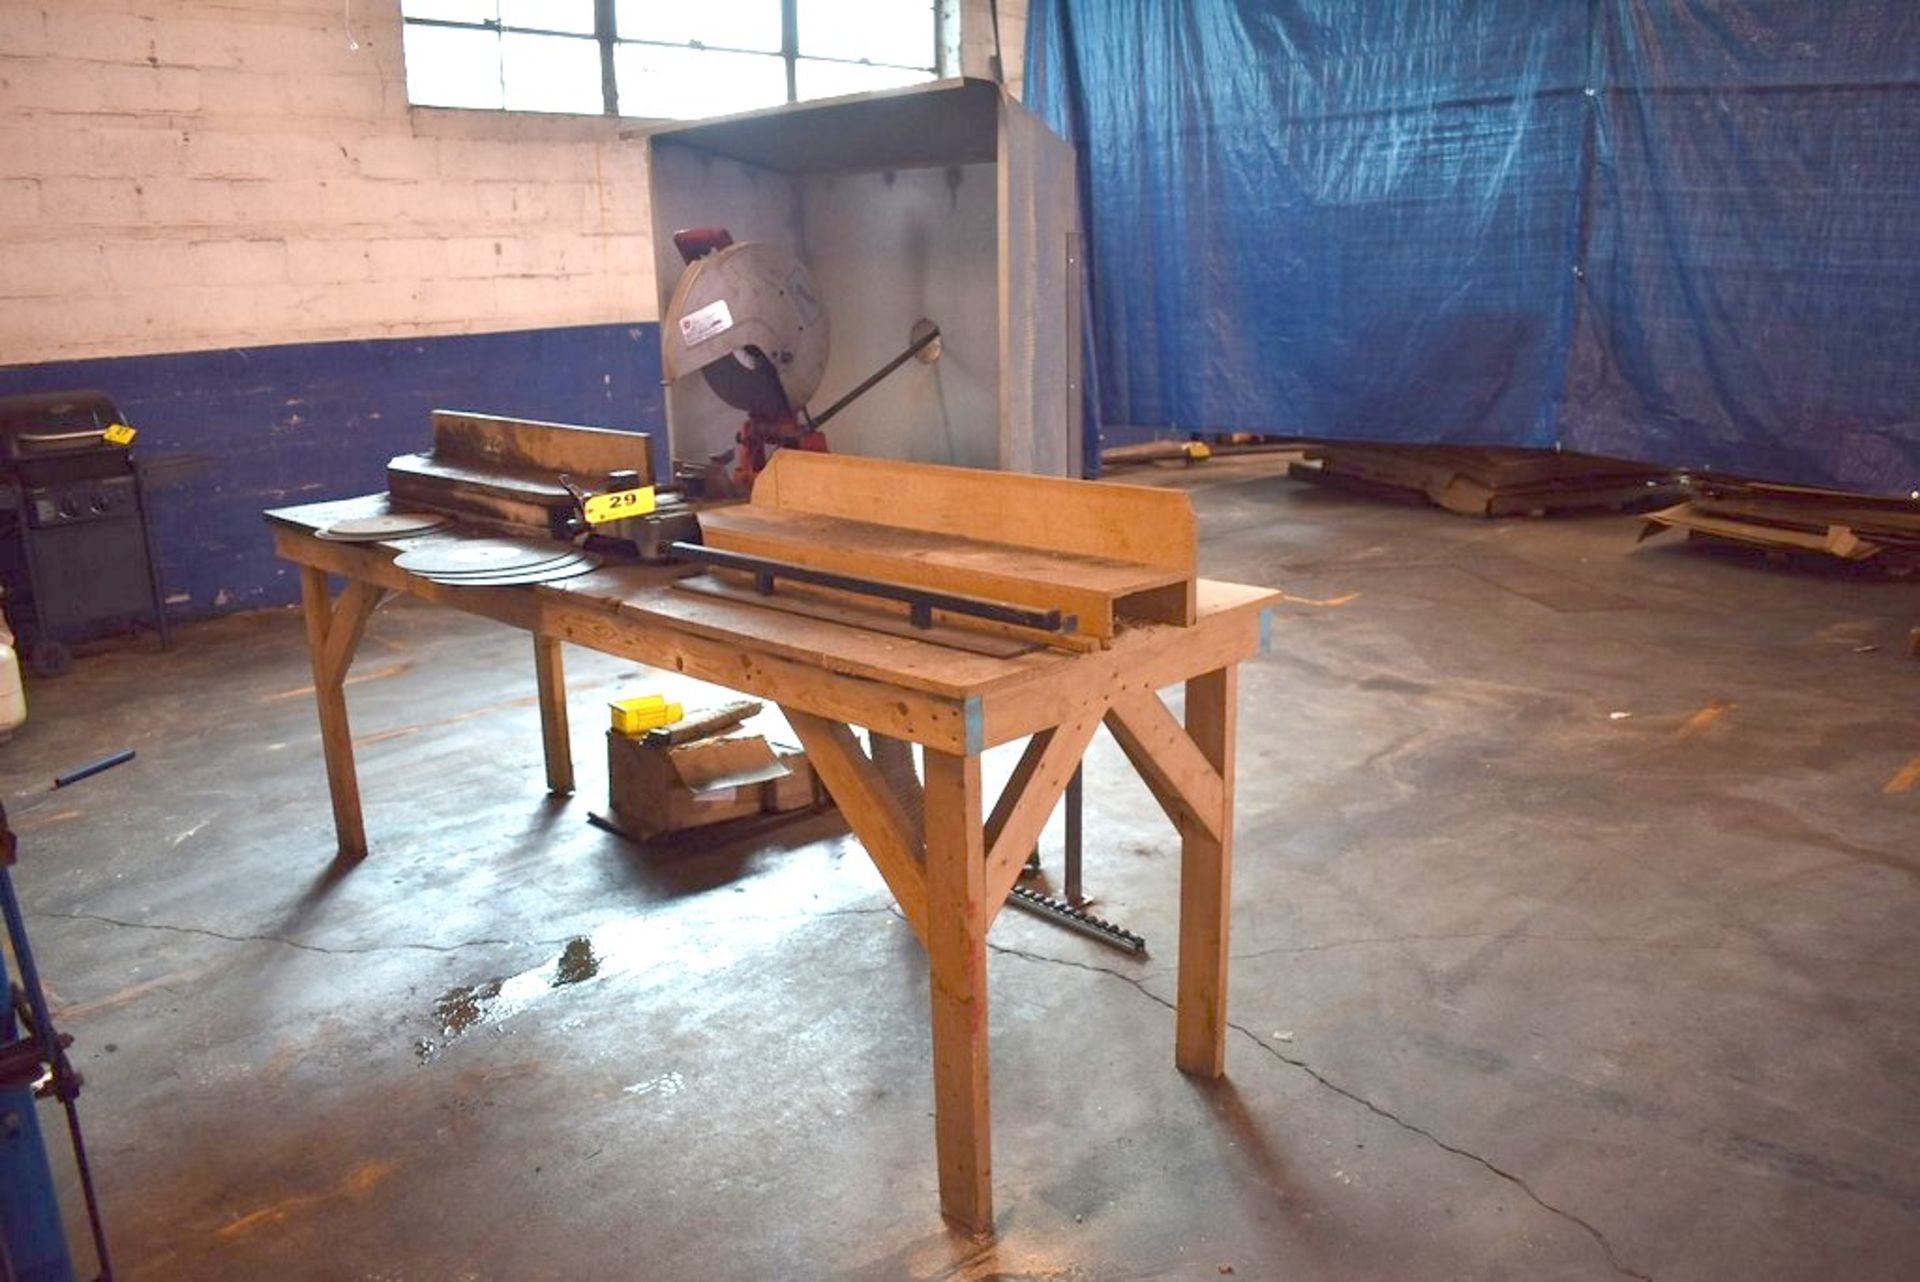 MILWAUKEE 14" ABRASIVE CUT OFF SAW, WITH BENCH, SPARE BLADES - Image 2 of 2